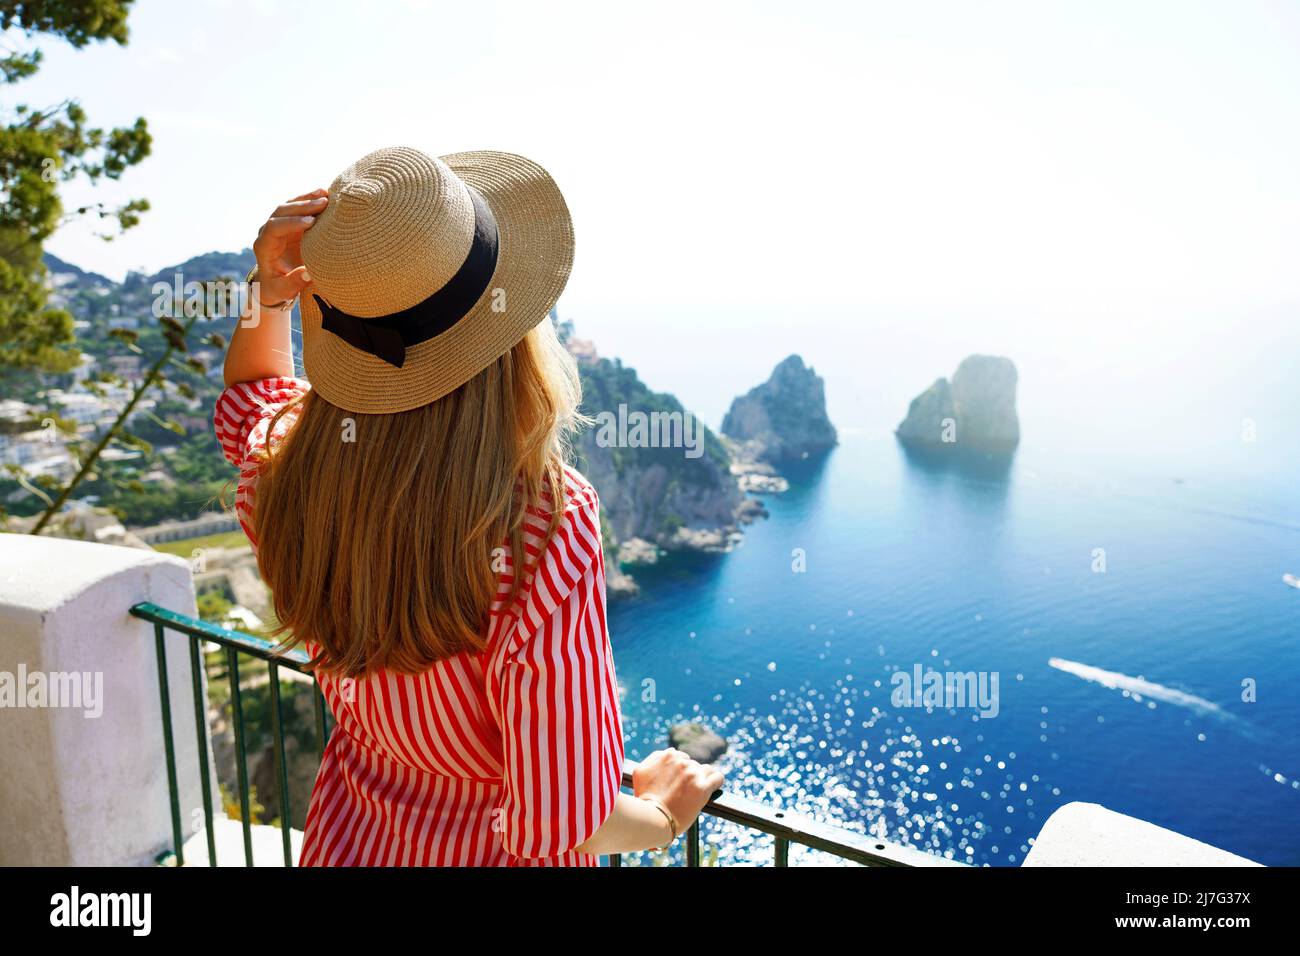 Beautiful young fashion woman with striped dress and hat in Capri Island with Faraglioni sea stack and blue crystalline water on the background, Capri Stock Photo